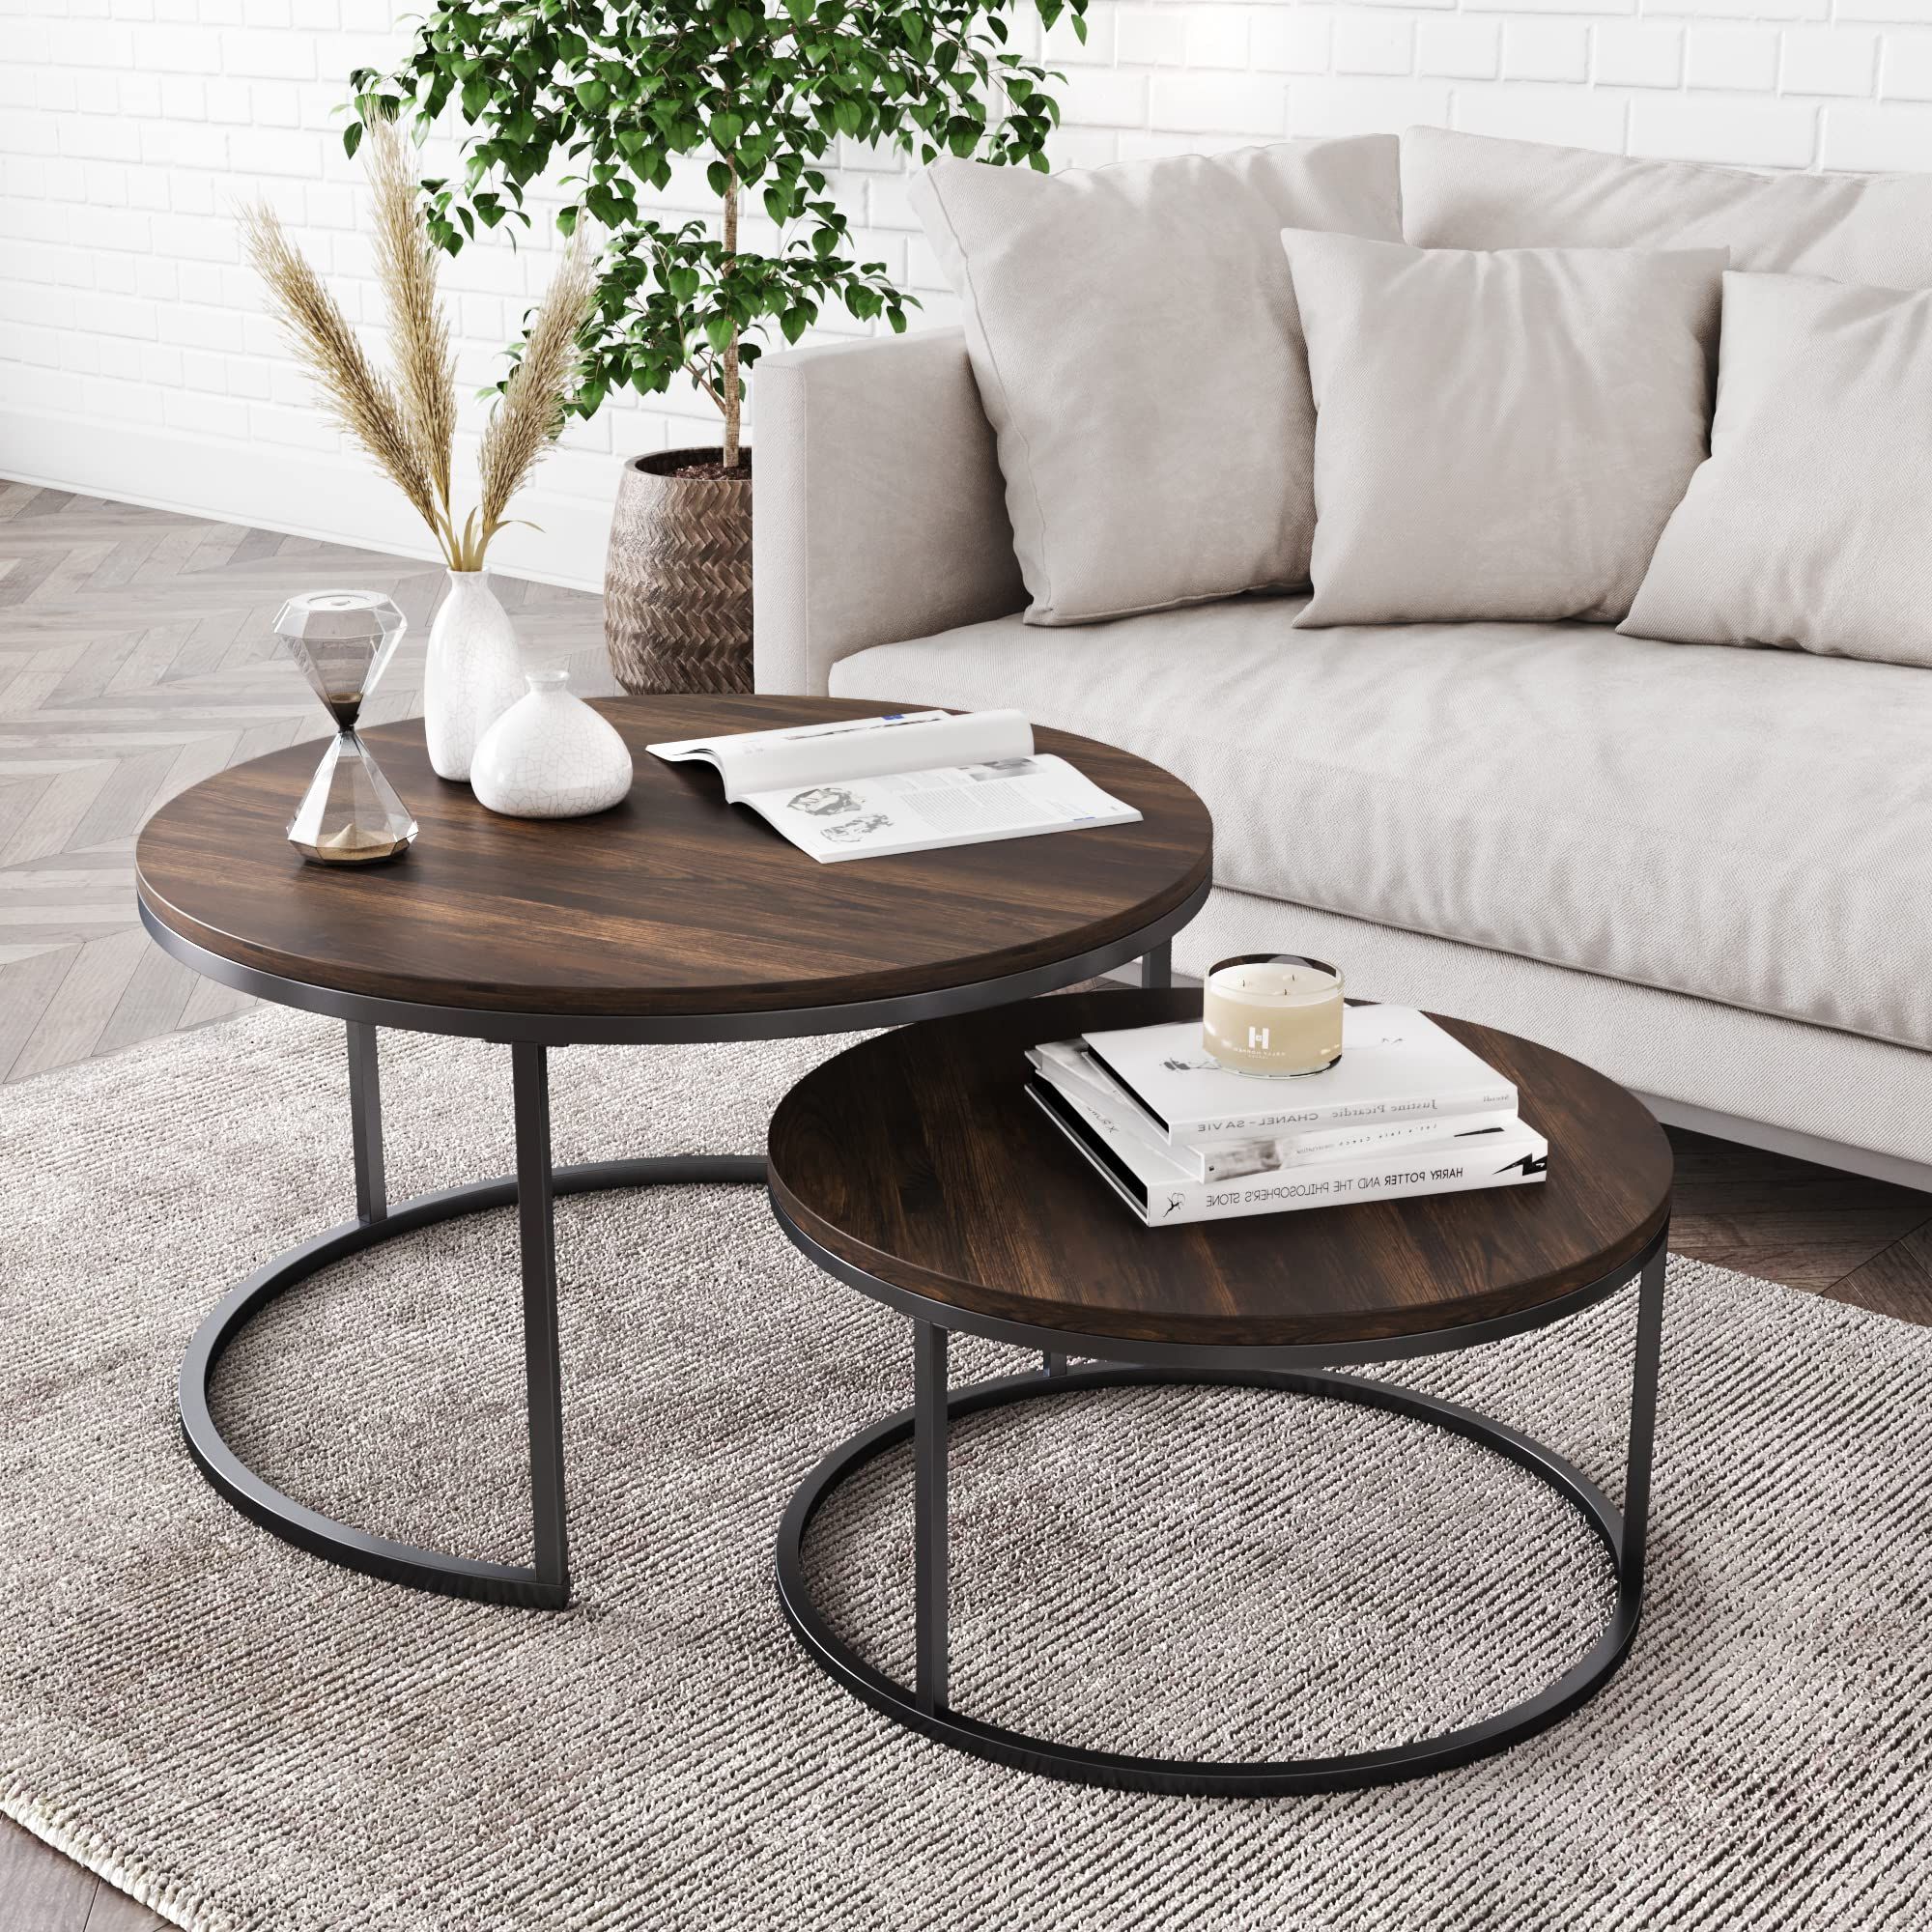 Well Known Modern Nesting Coffee Tables Within Amazon: Nathan James Stella Round Modern Nesting Coffee Set Of 2,  Stacking Living Room Accent Tables With An Industrial Wood Finish And  Powder Coated Metal Frame, Warm Nutmeg/matte Black : Home & (View 3 of 10)